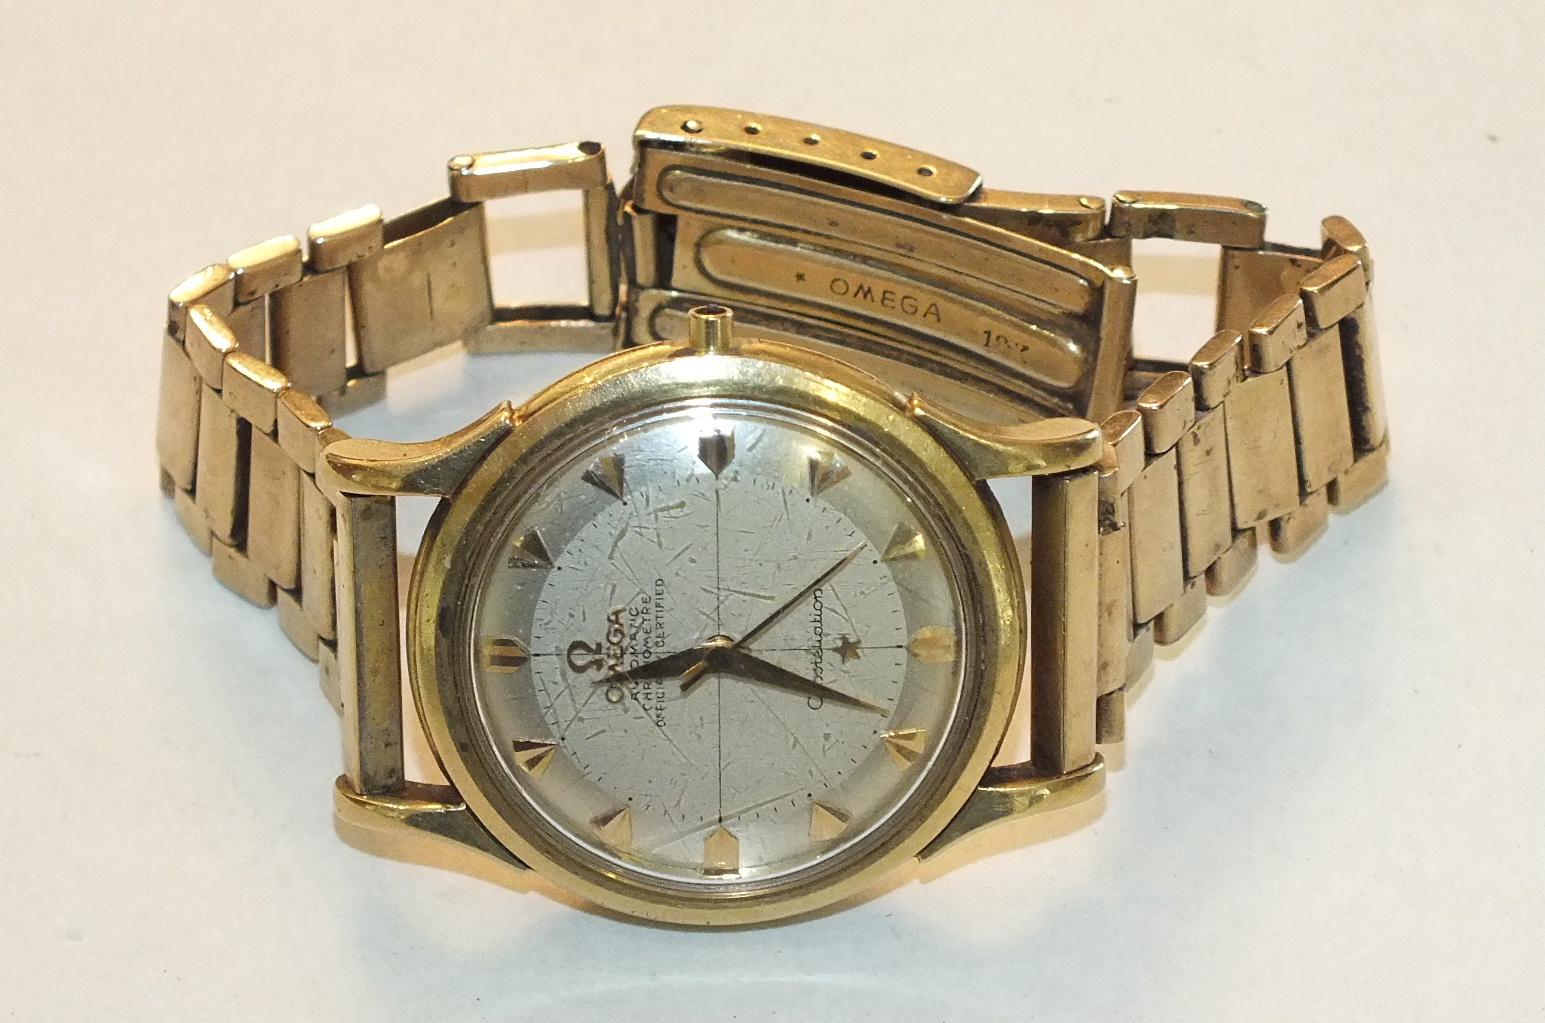 Omega, Automatic "Chronometre" Officially Certified Constellation 18ct gold gentleman's wrist - Image 3 of 3